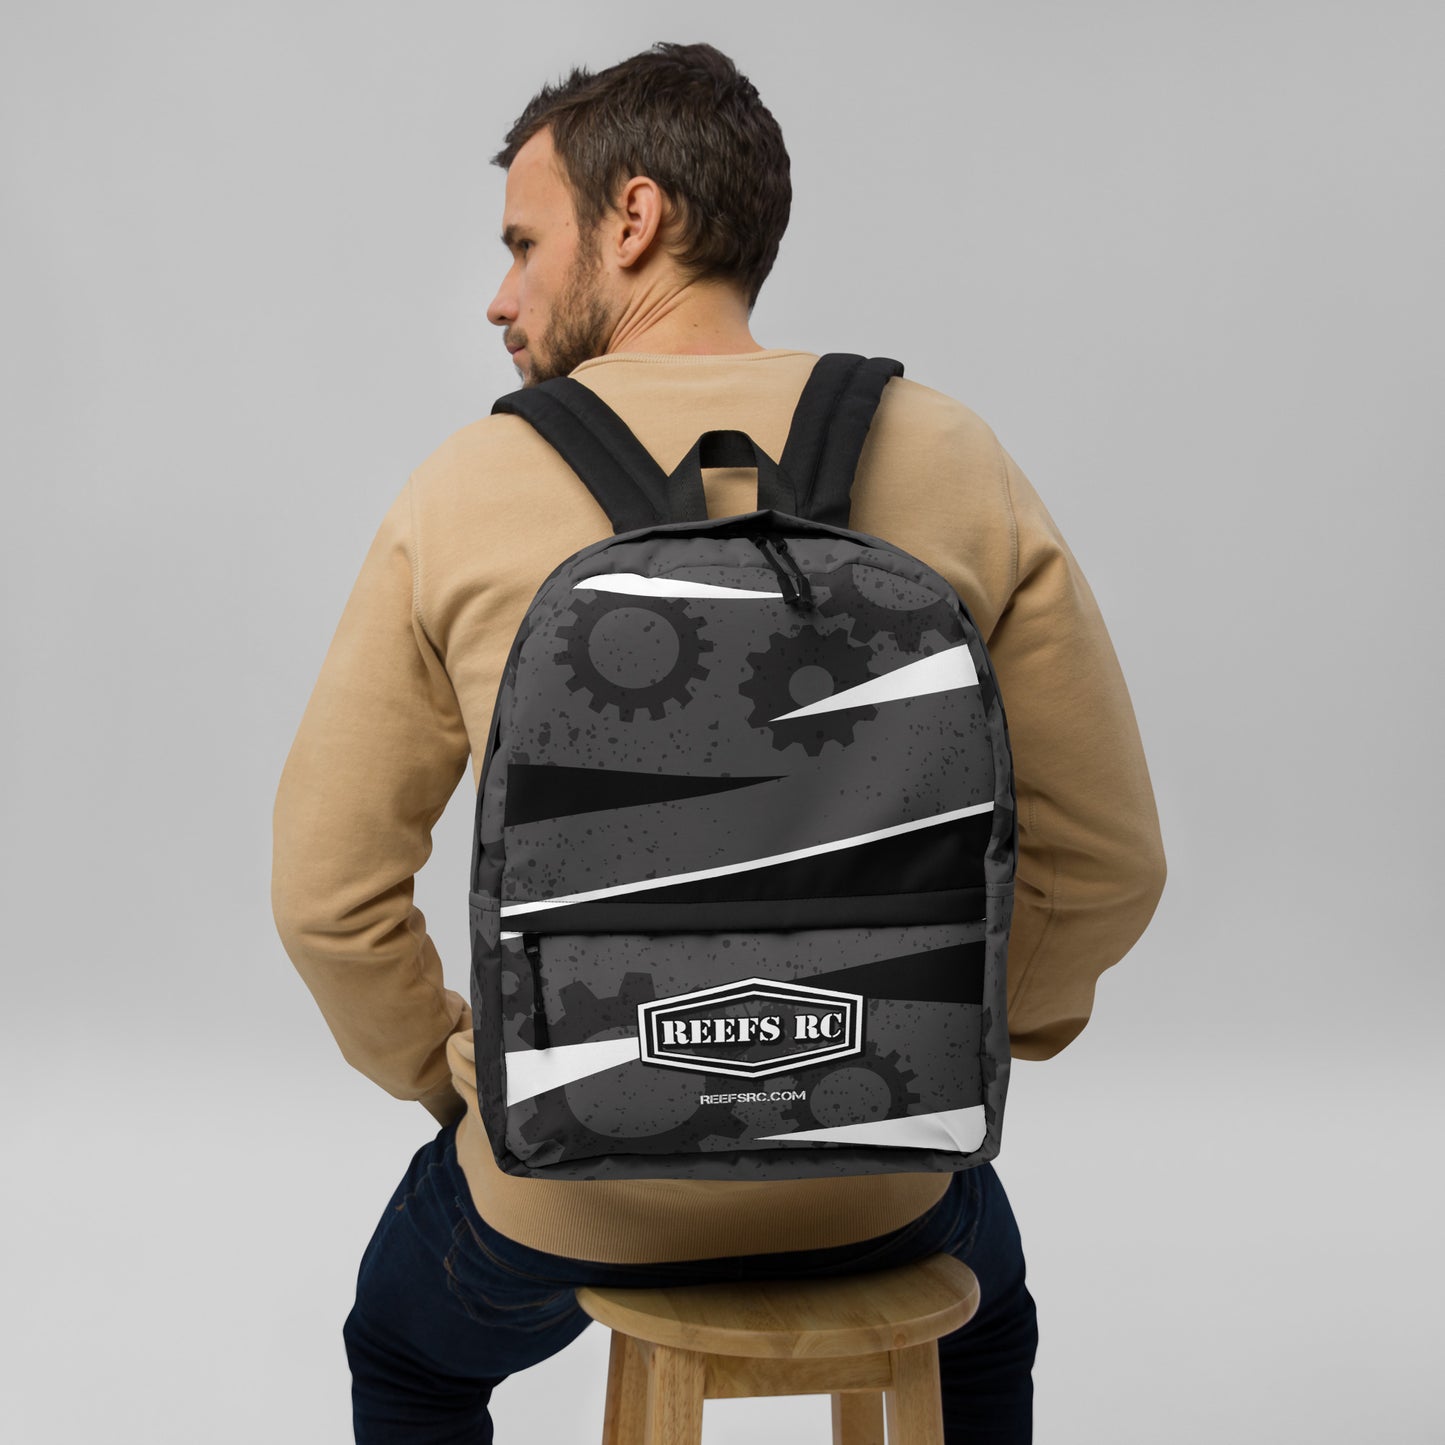 REEFS RC Livery Backpack